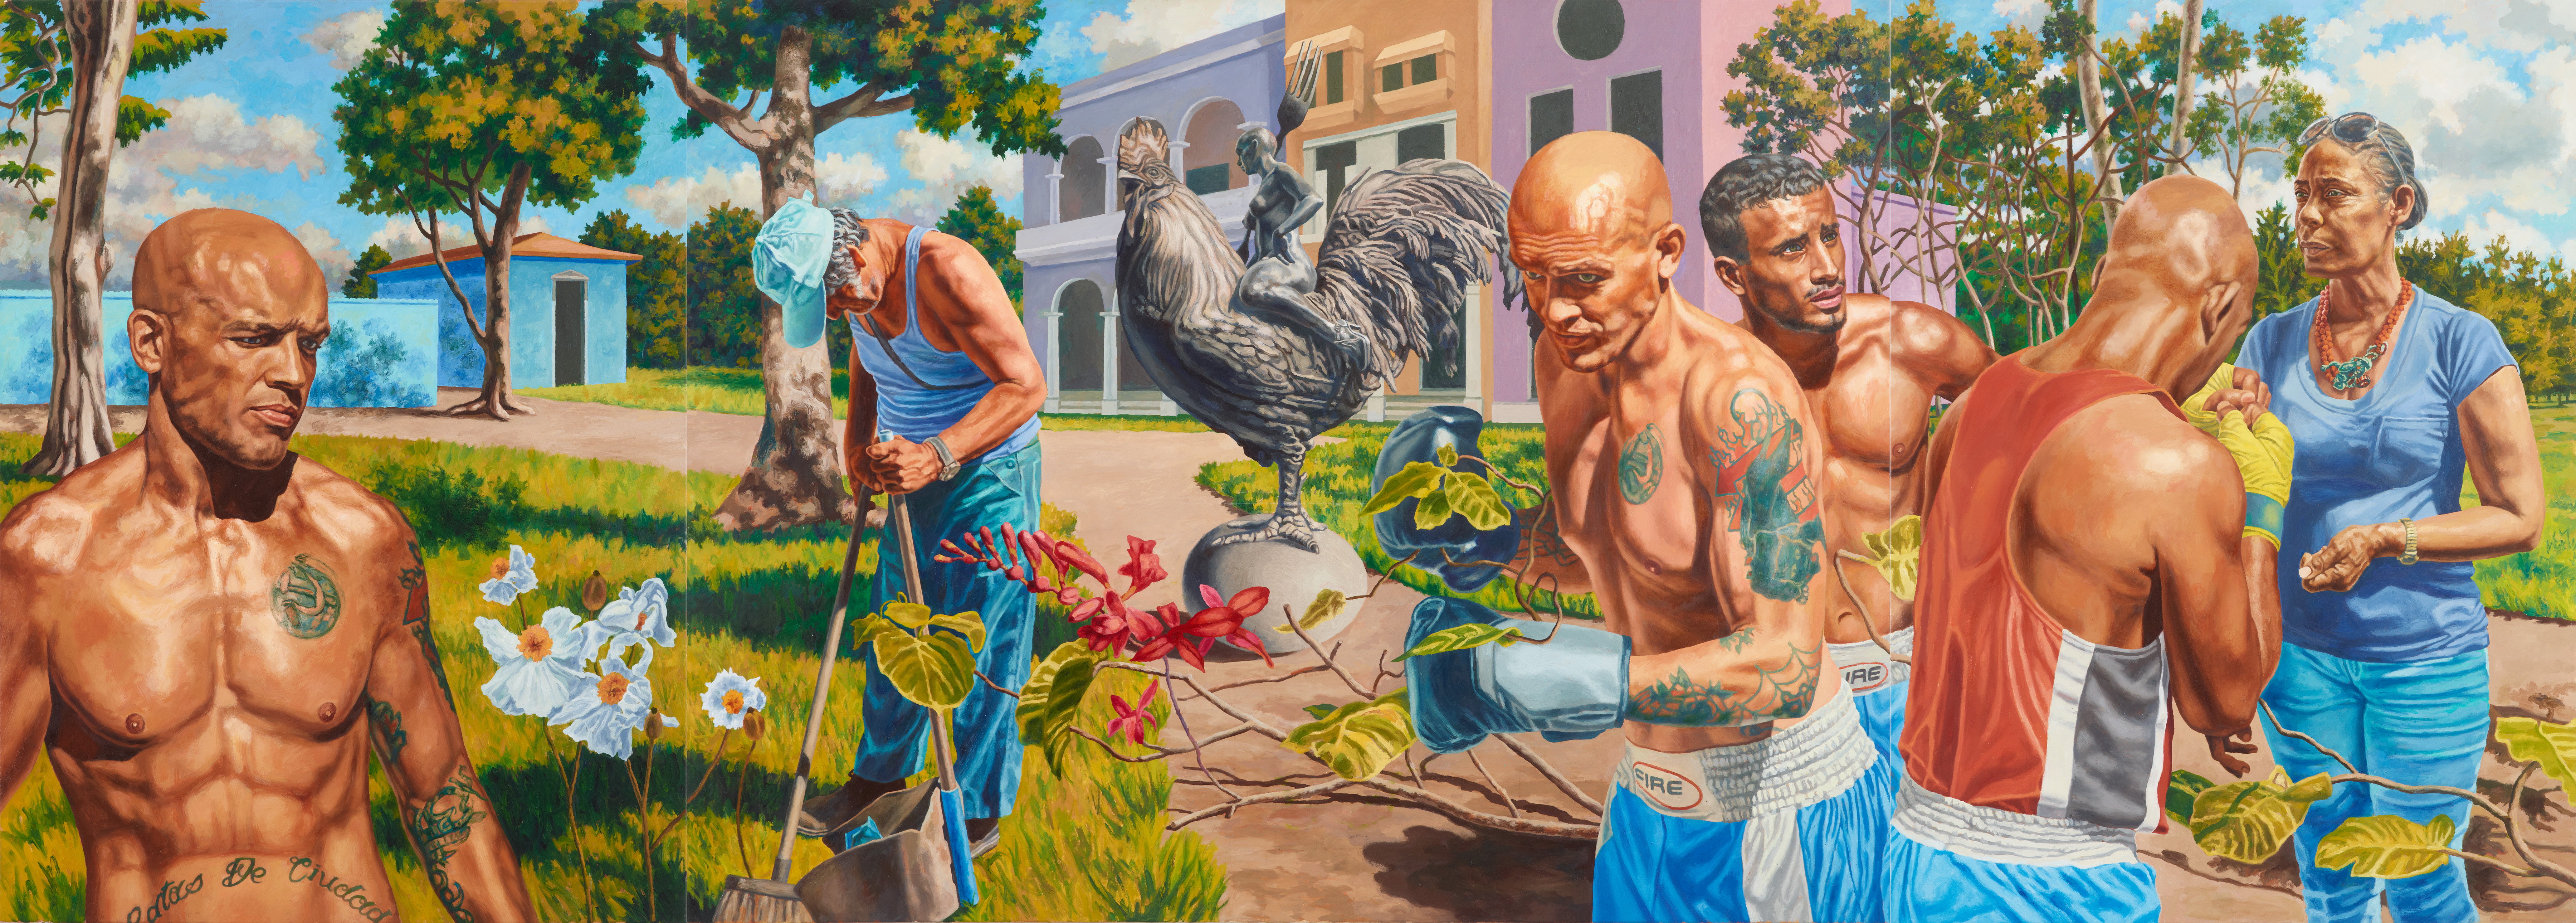 Cuban boxers and people gardening with rooster sculpture